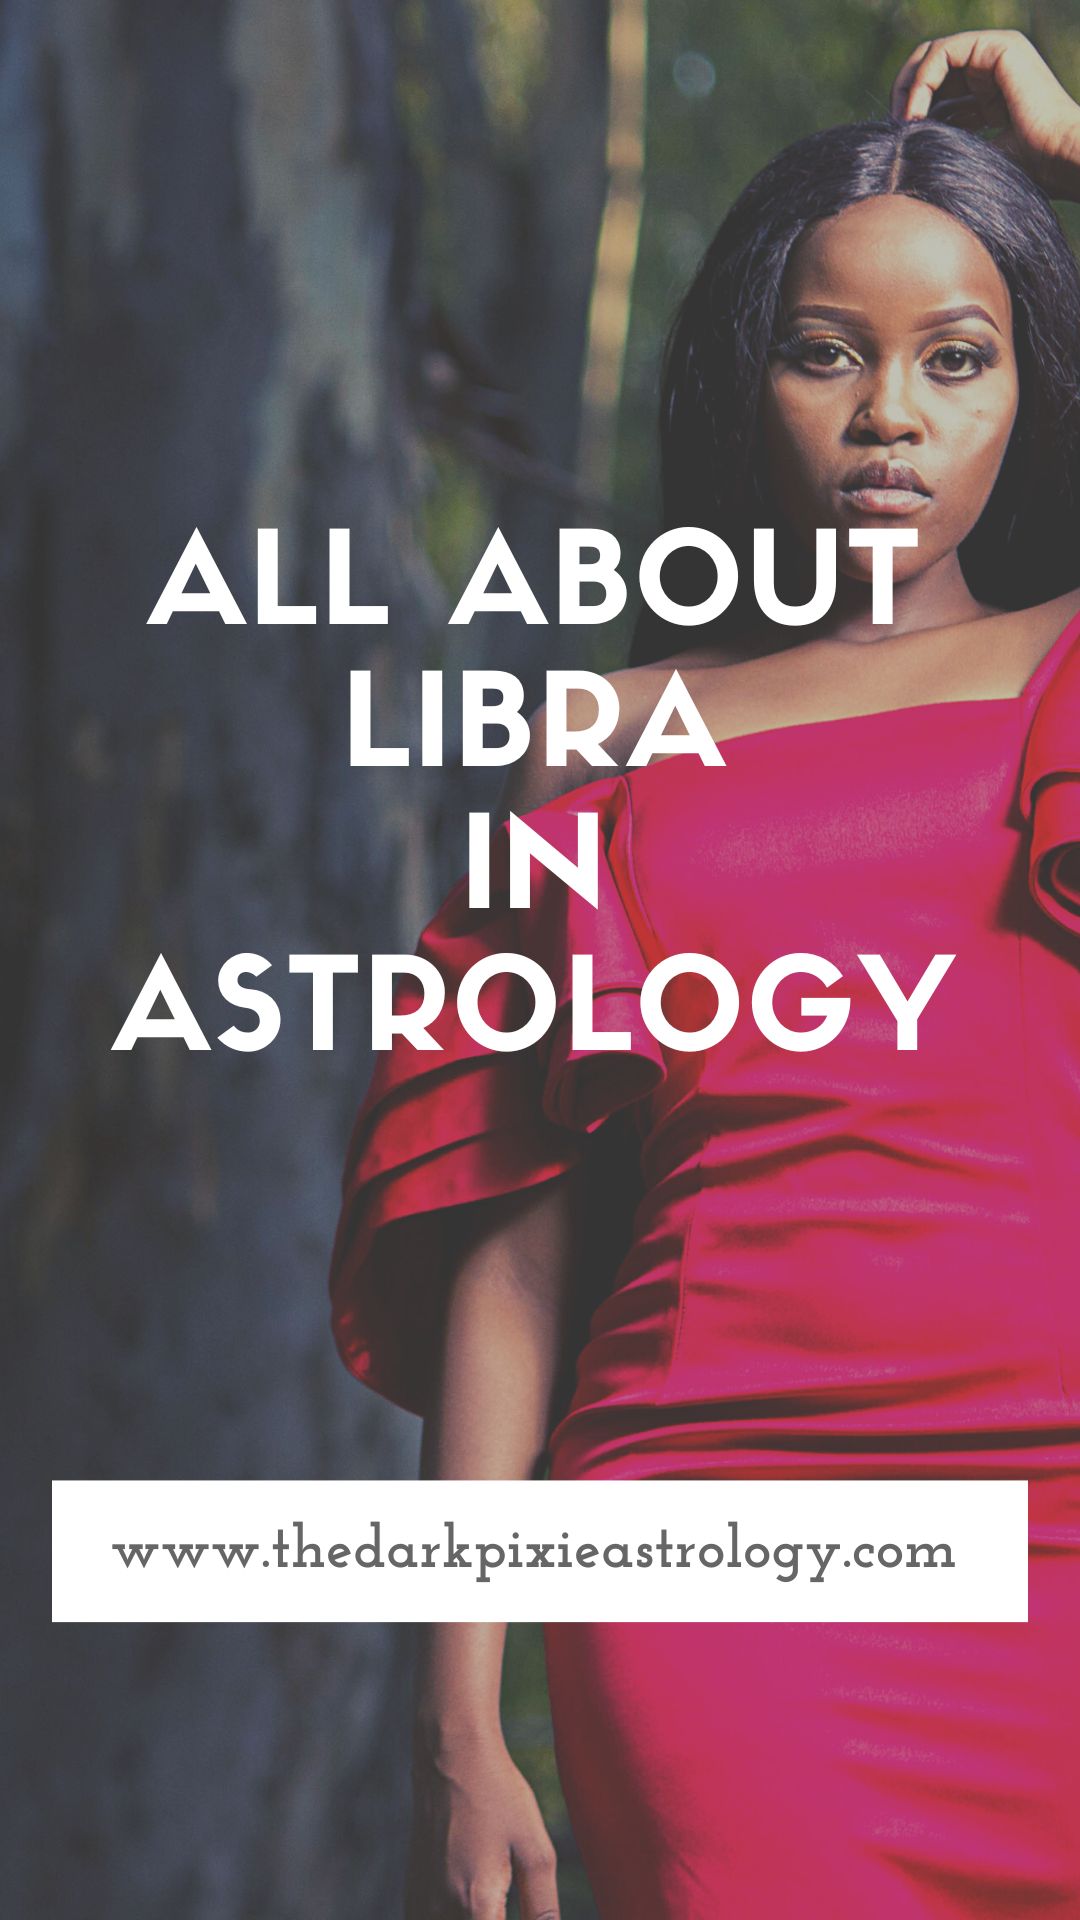 All About Libra in Astrology - The Dark Pixie Astrology